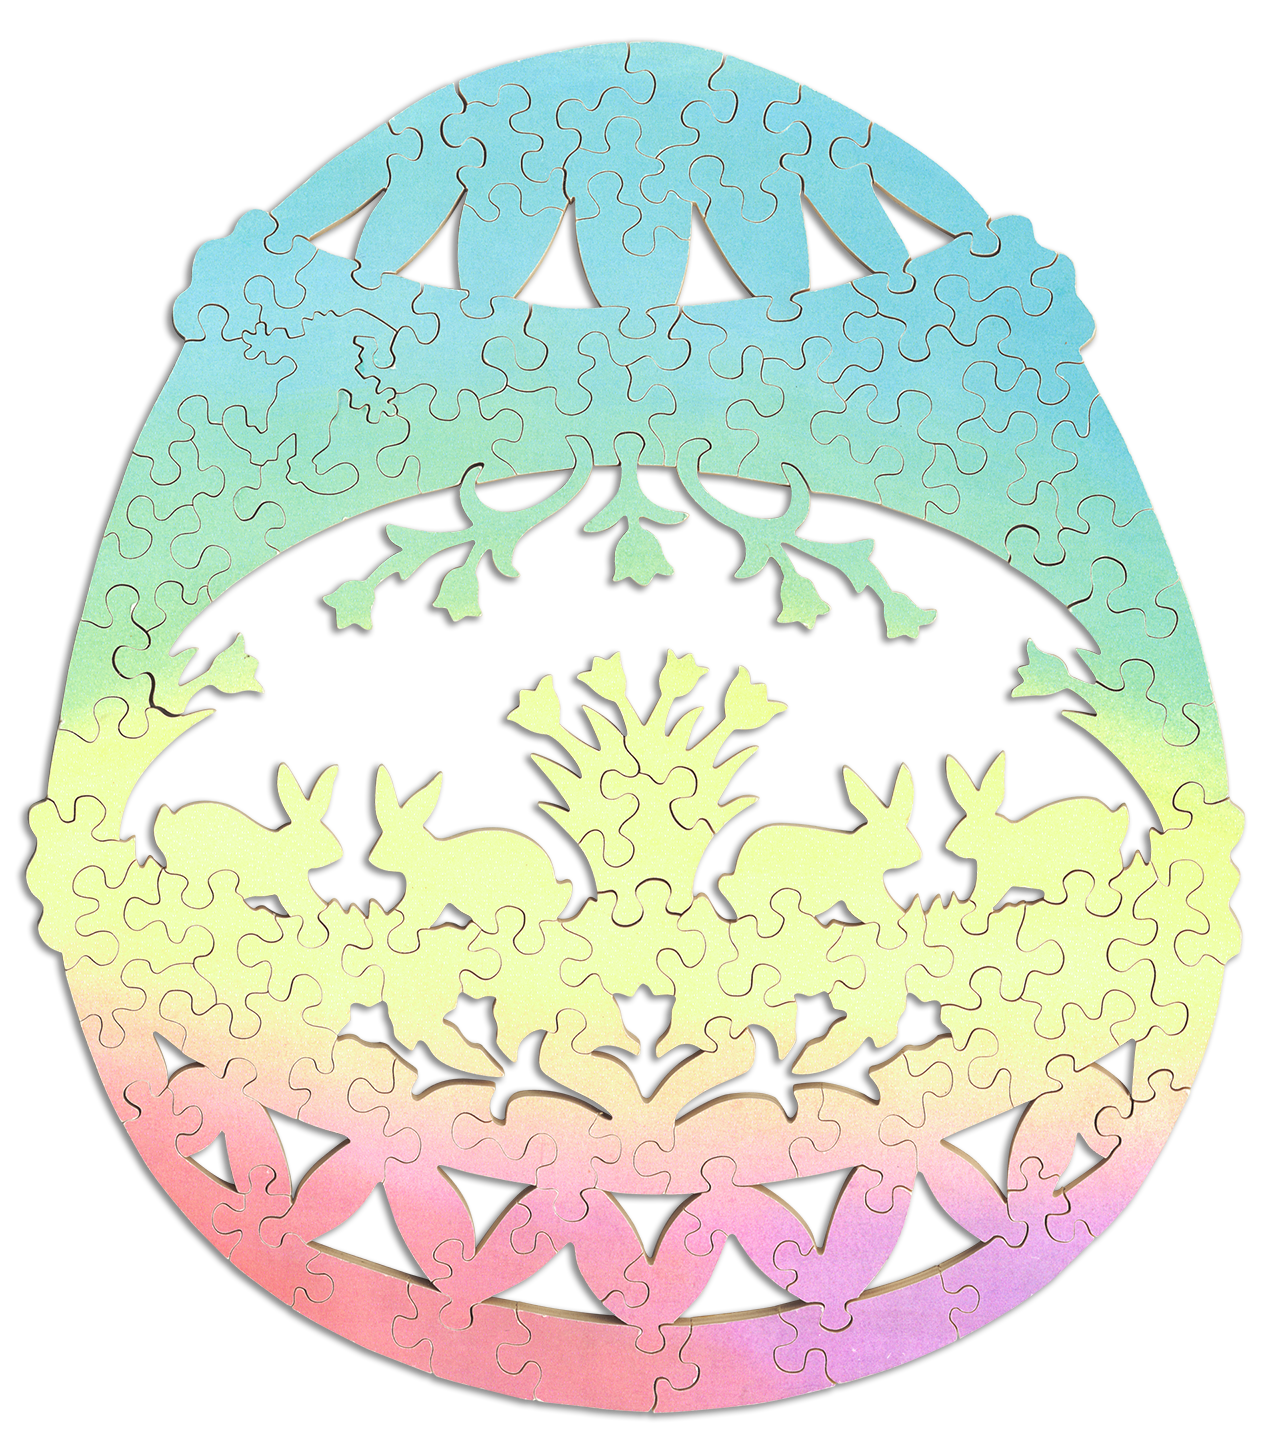 Pastel gradient Easter Egg shaped puzzle with negative space revealing bunny and flower design.